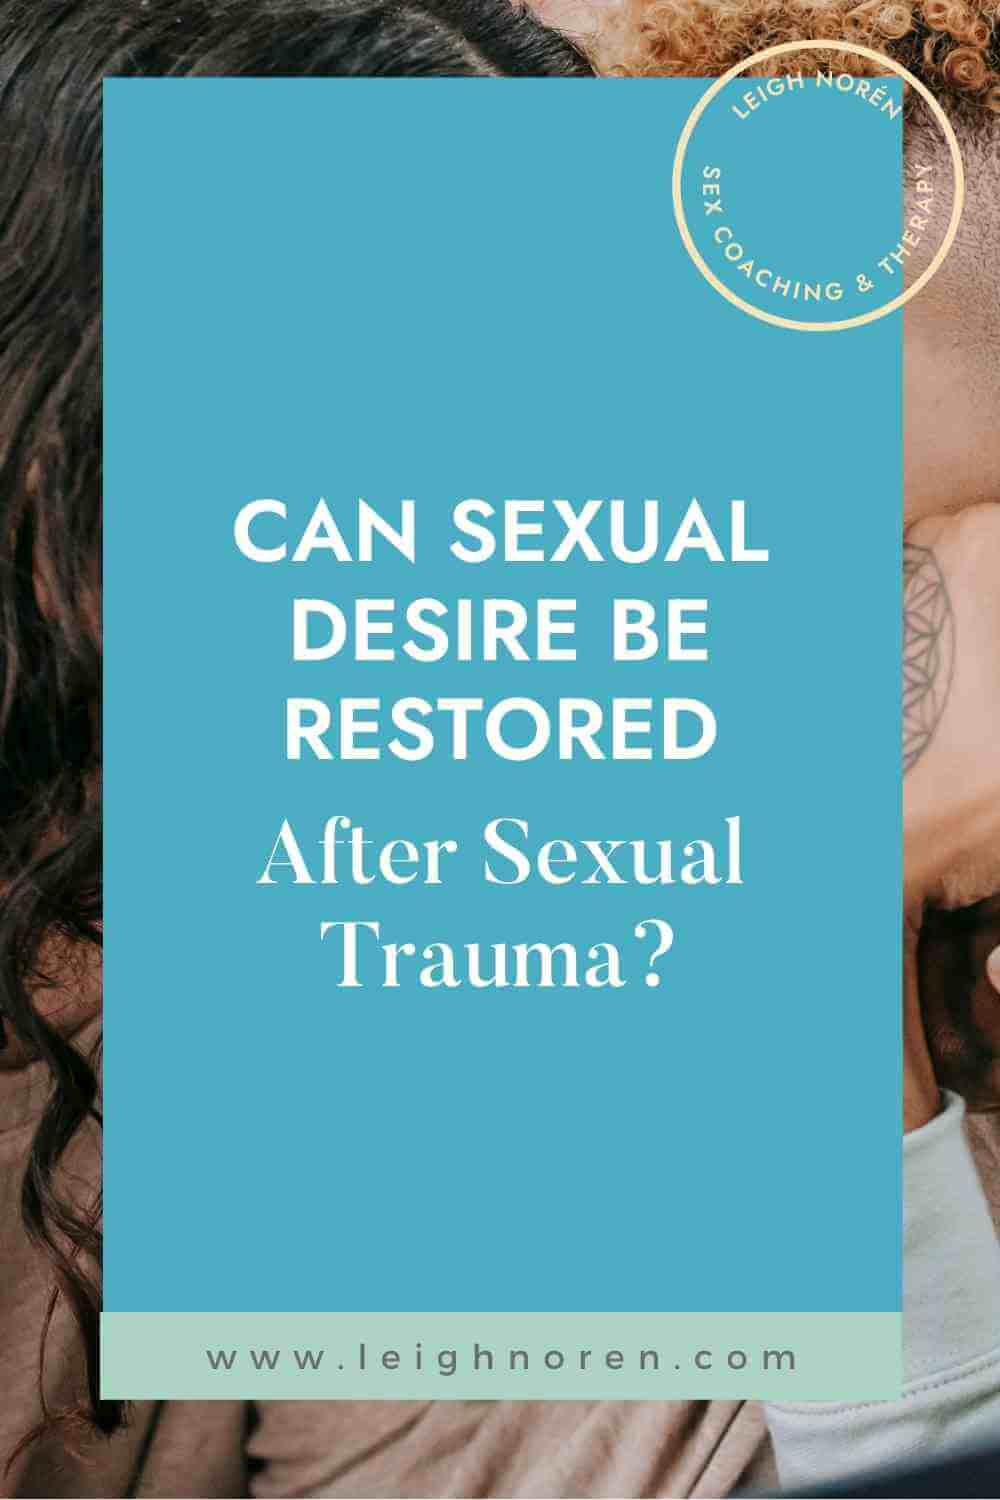 Can Sexual Desire Be Restored After Sexual Trauma?